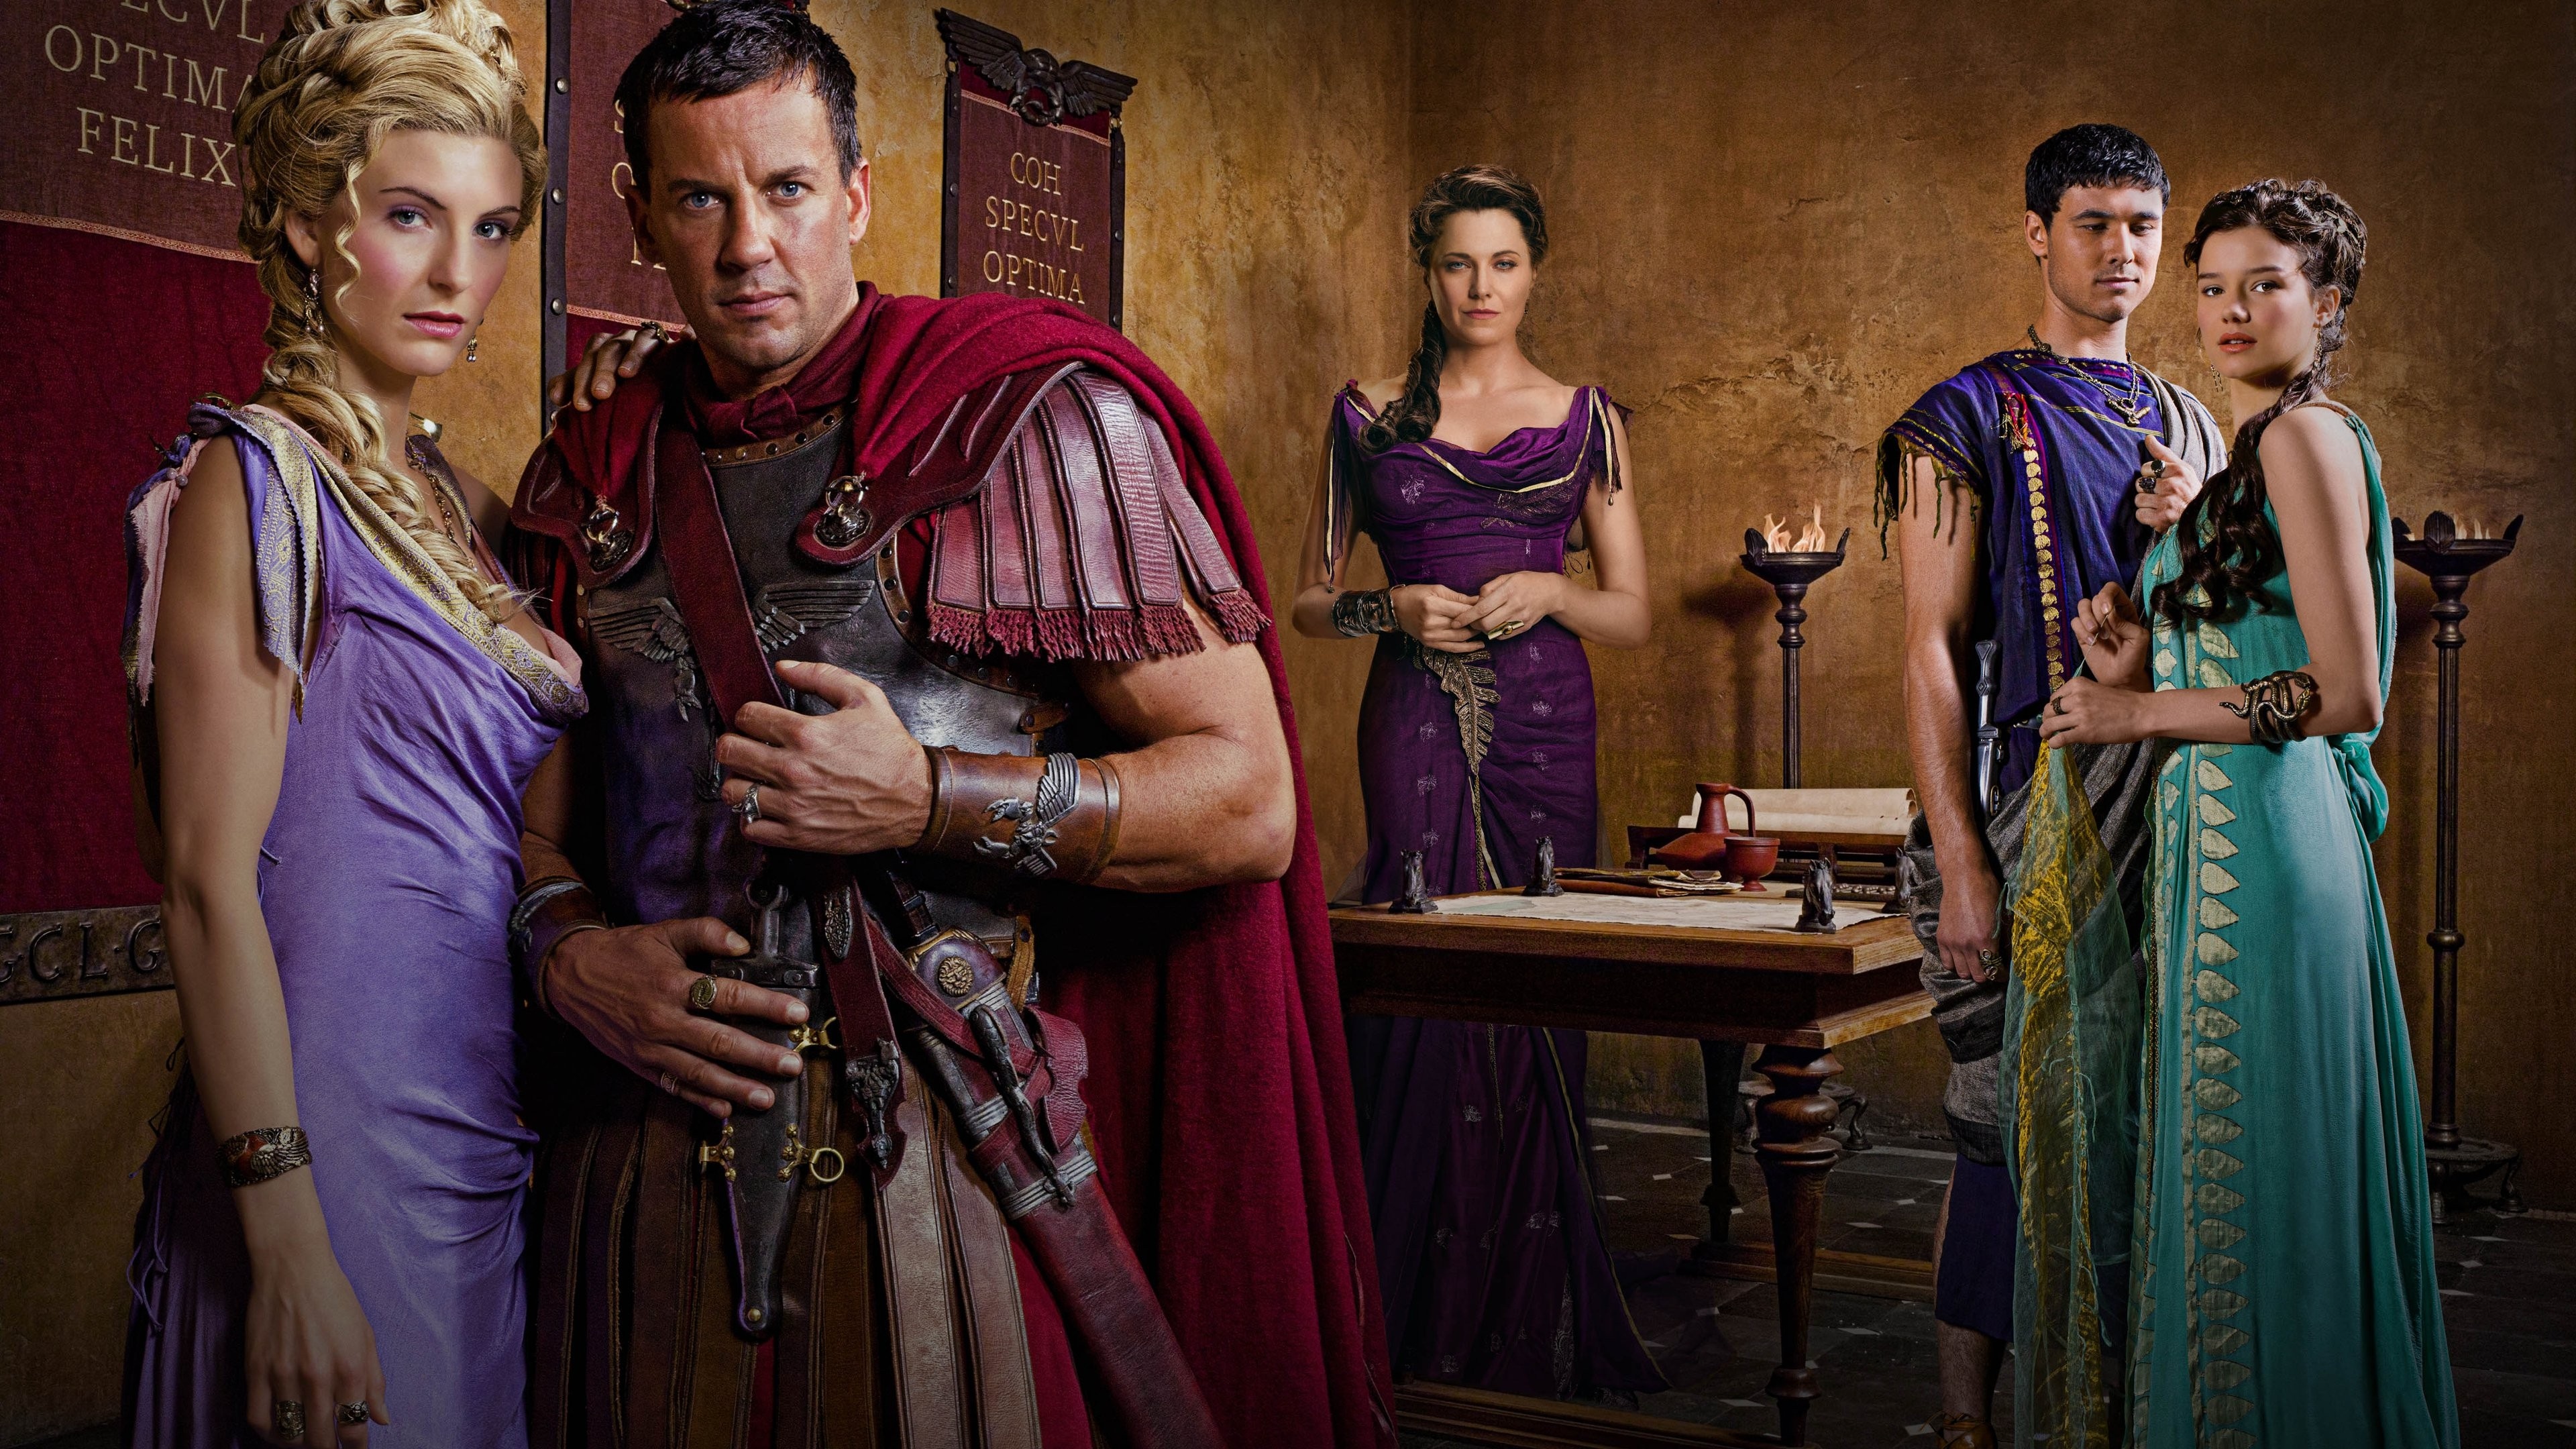 Lucy Lawless: Spartacus, An American television series, Liam McIntyre, Viva Bianca, Craig Parker, Manu Bennett. 3840x2160 4K Background.